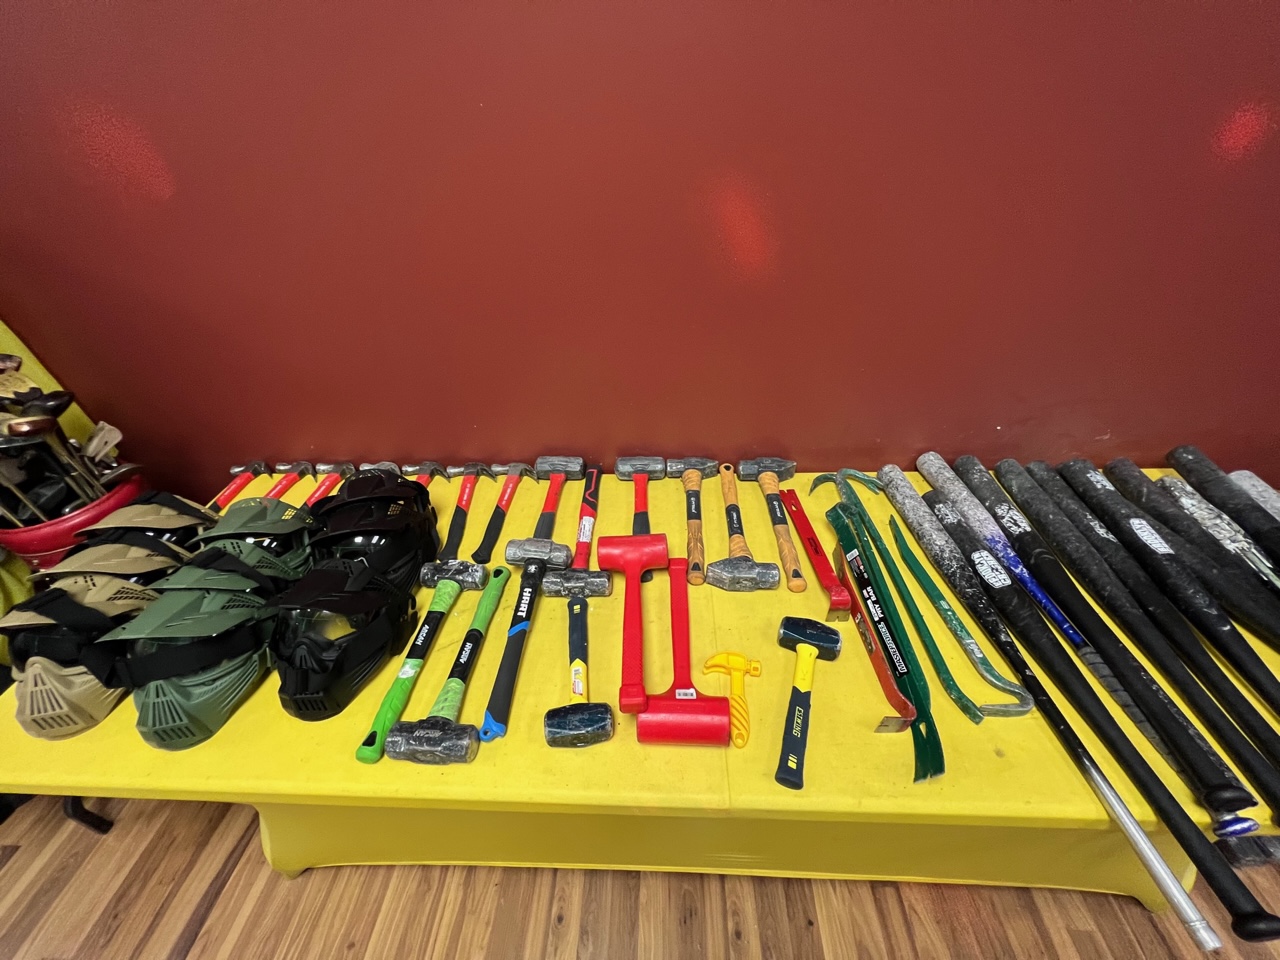 On a yellow table, there are military style helmets, sledge hammers, hammers, crowbars, and baseball bats neatly arranged. Photo by Alyssa Buckley.